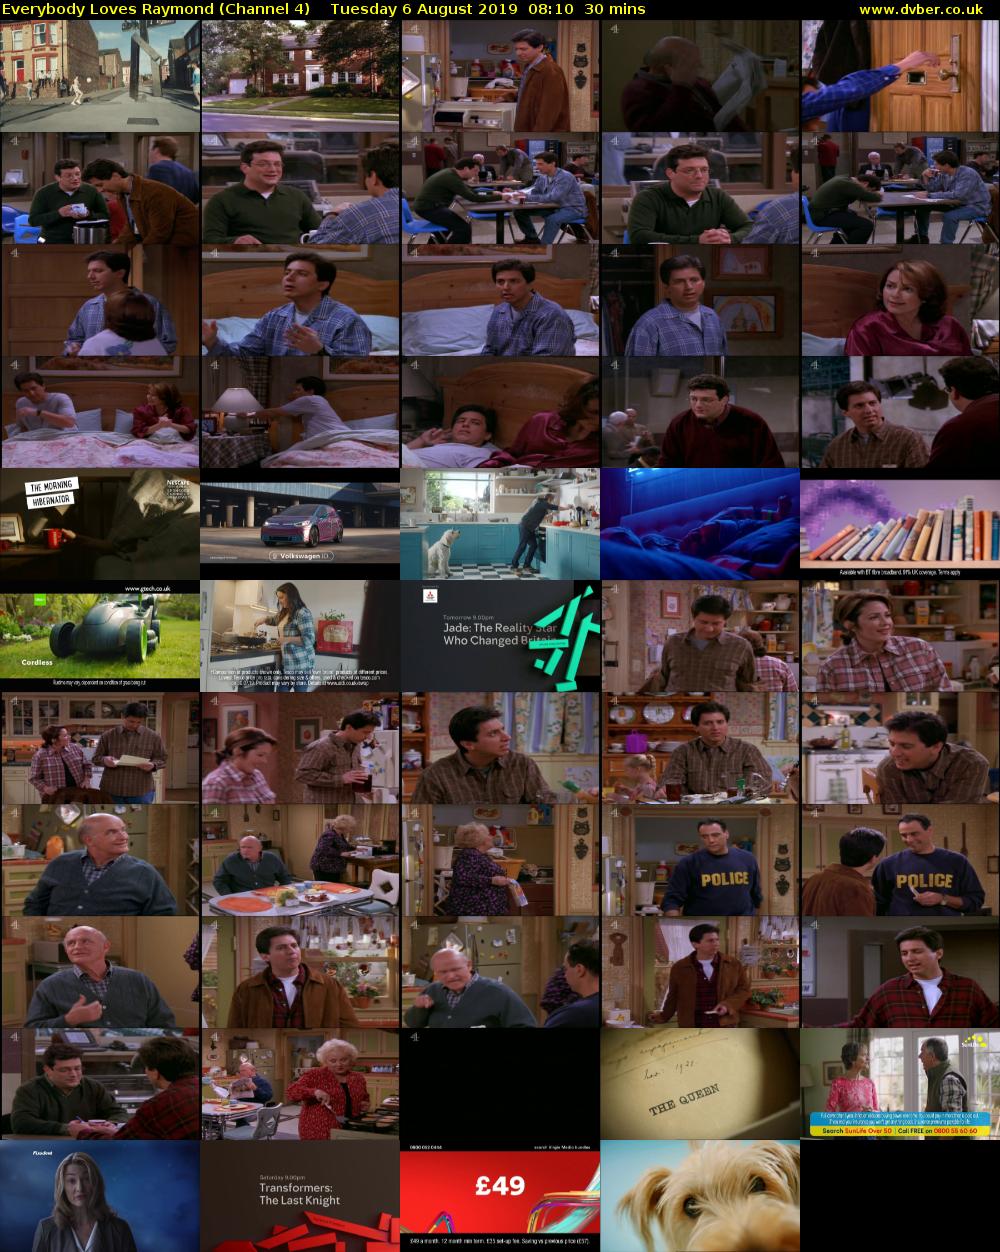 Everybody Loves Raymond (Channel 4) Tuesday 6 August 2019 08:10 - 08:40